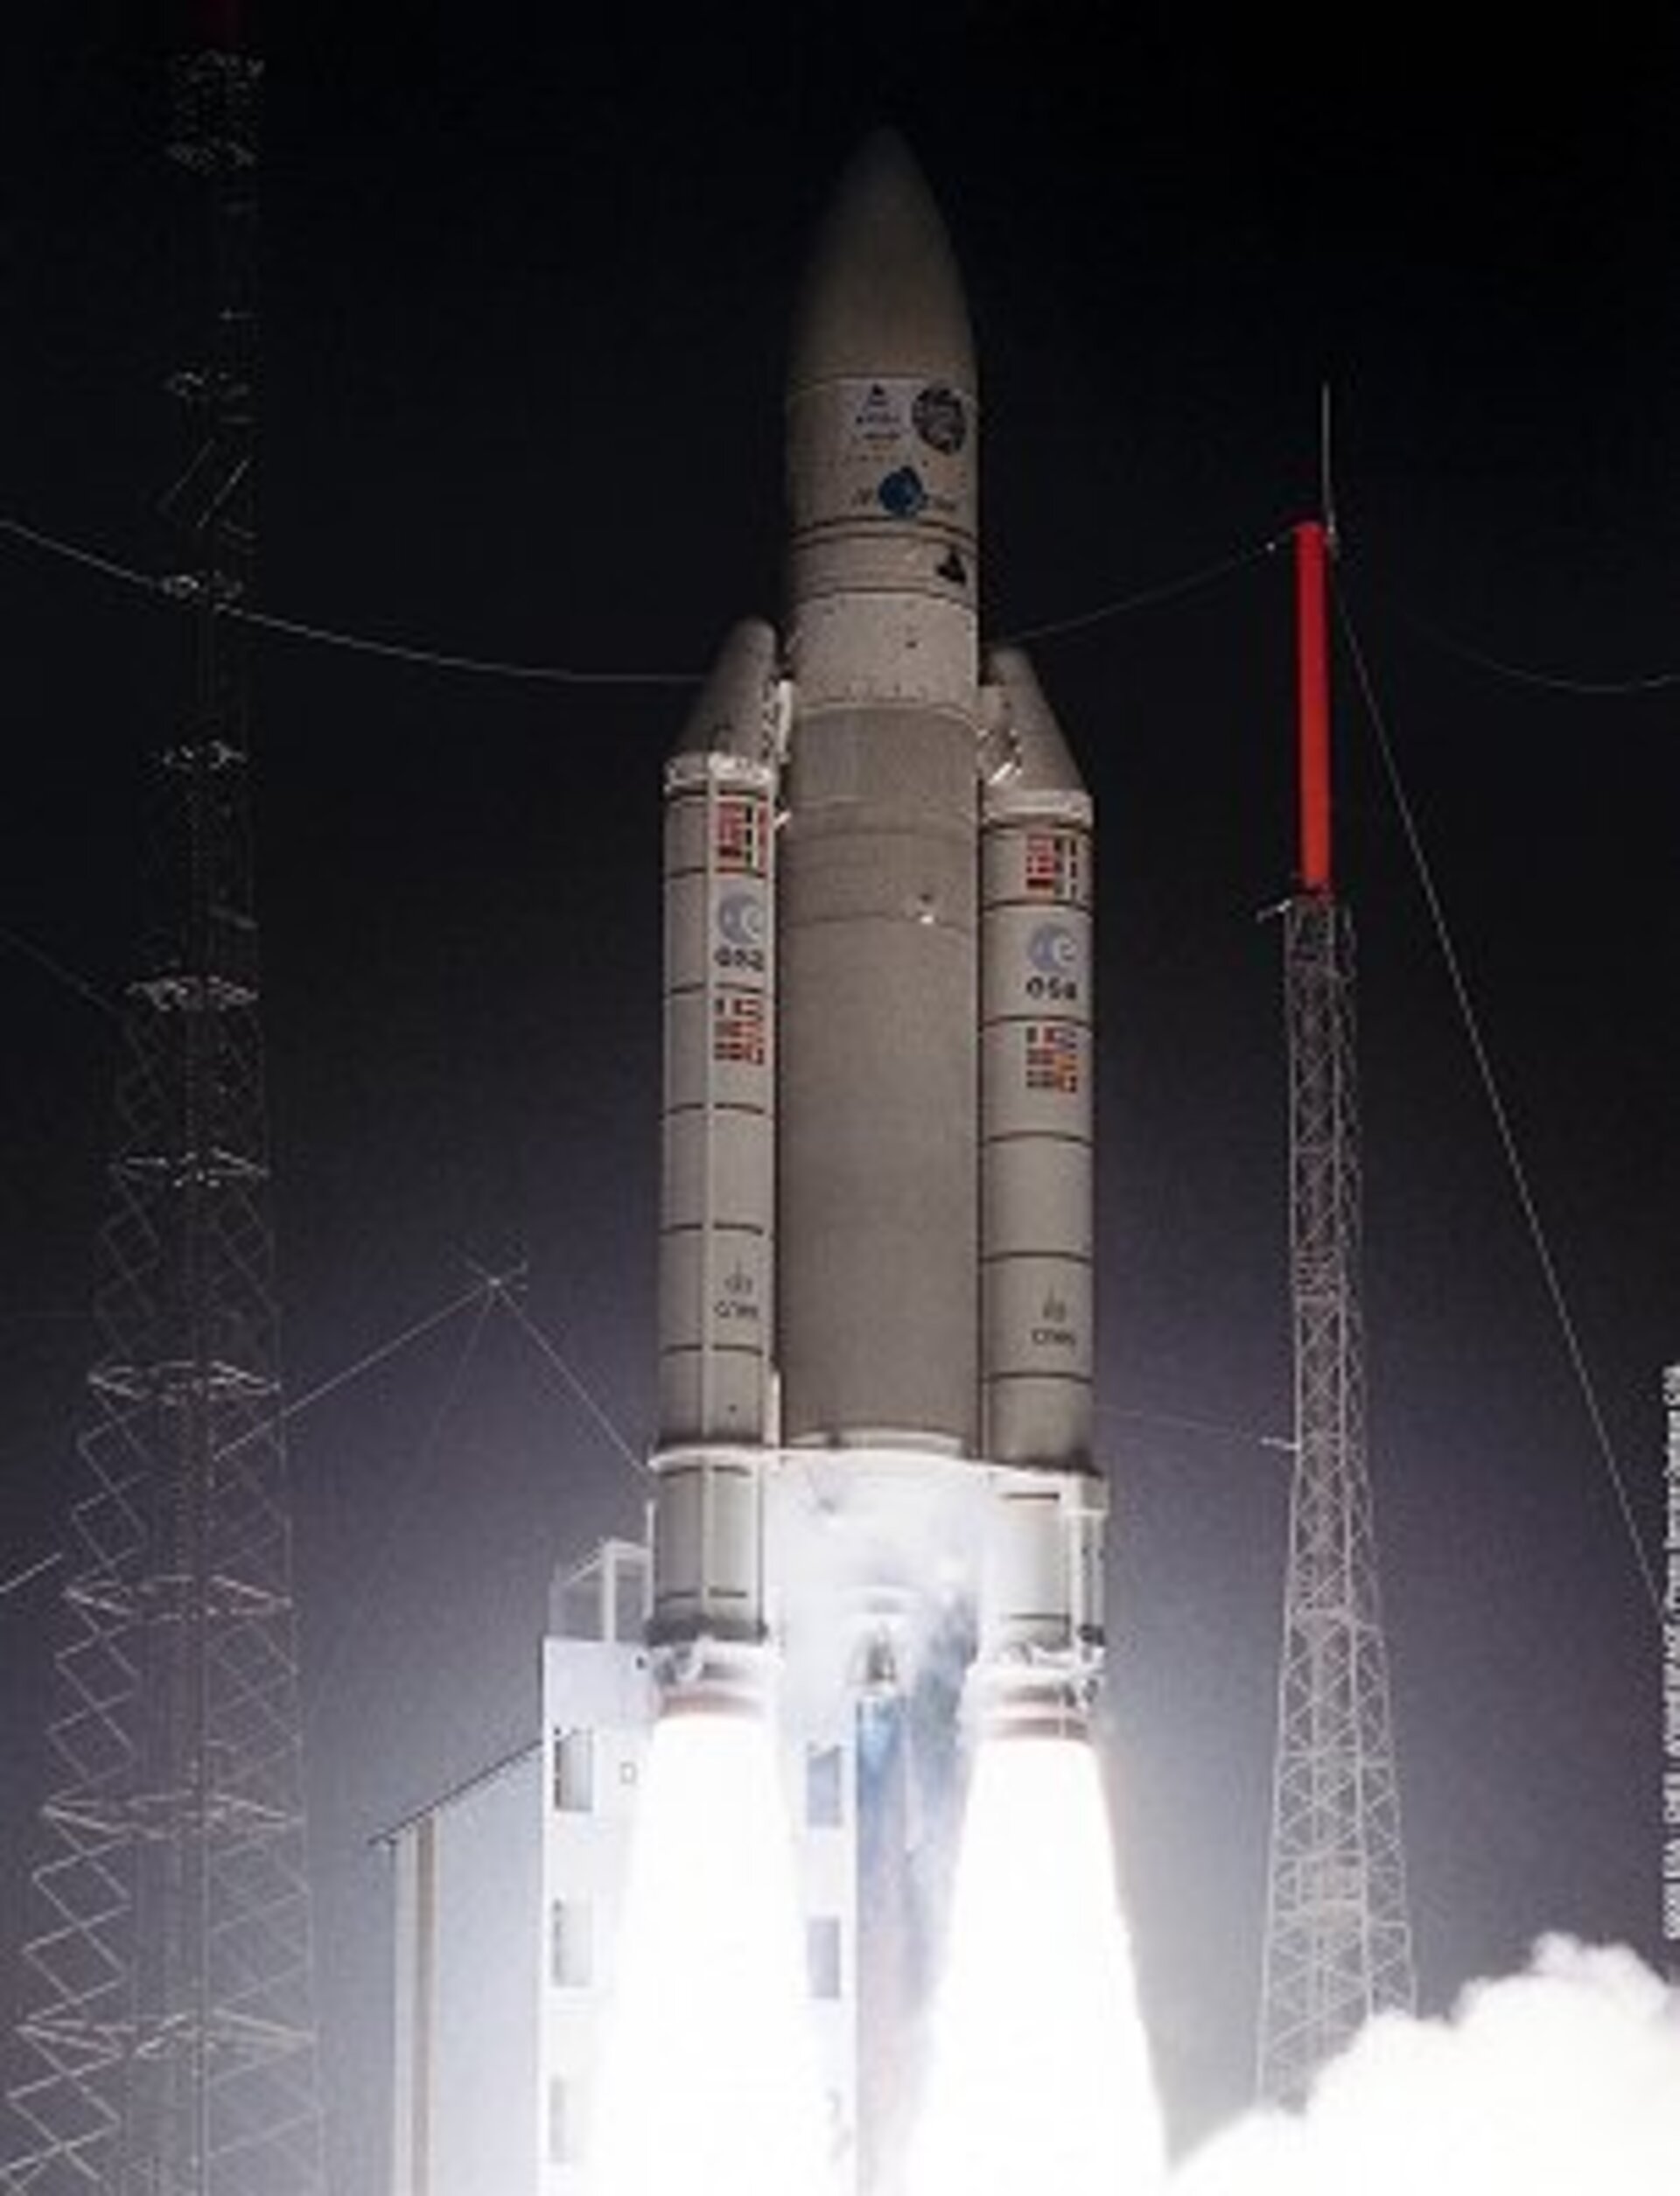 Launch of Ariane-5 flight V138 from the European Space Centre, Kourou, French Guiana, 19 December 2000.